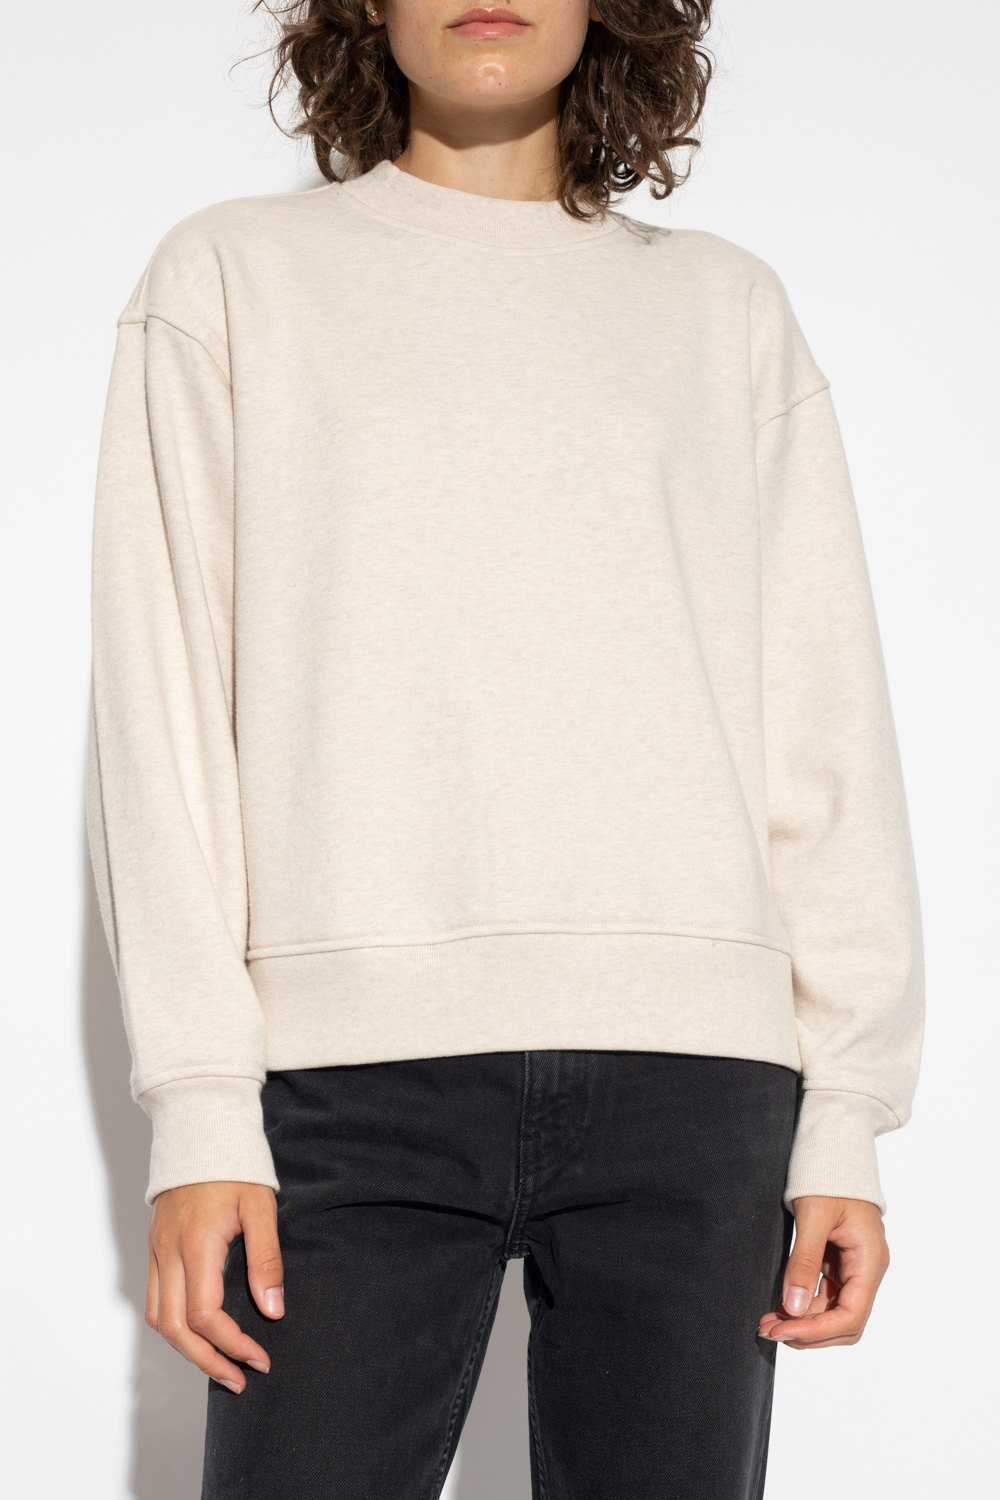 Levi's Sweatshirt ‘Made & Crafted®’ collection